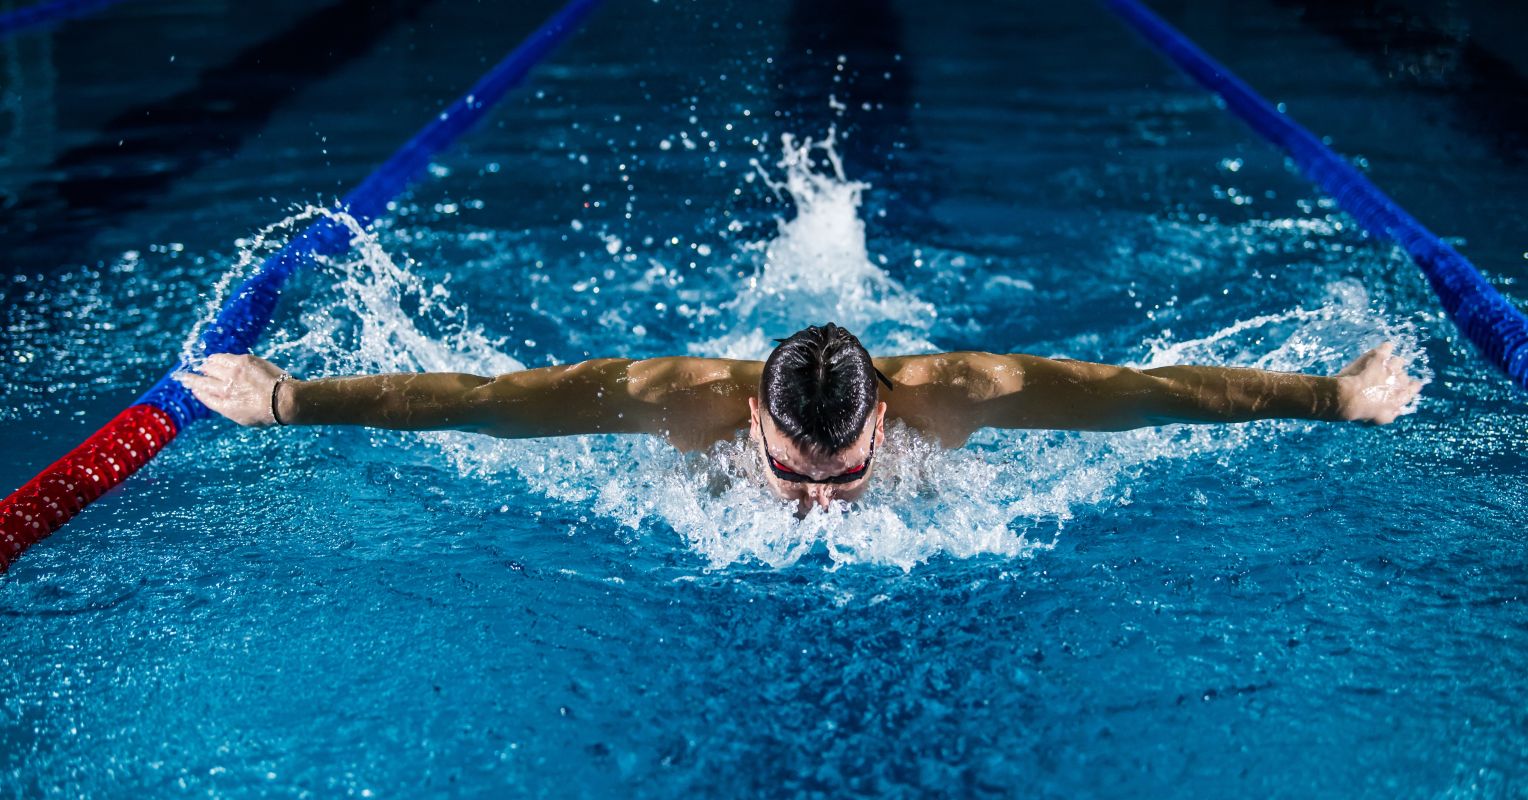 What We Can Learn From Michael Phelps About ADHD